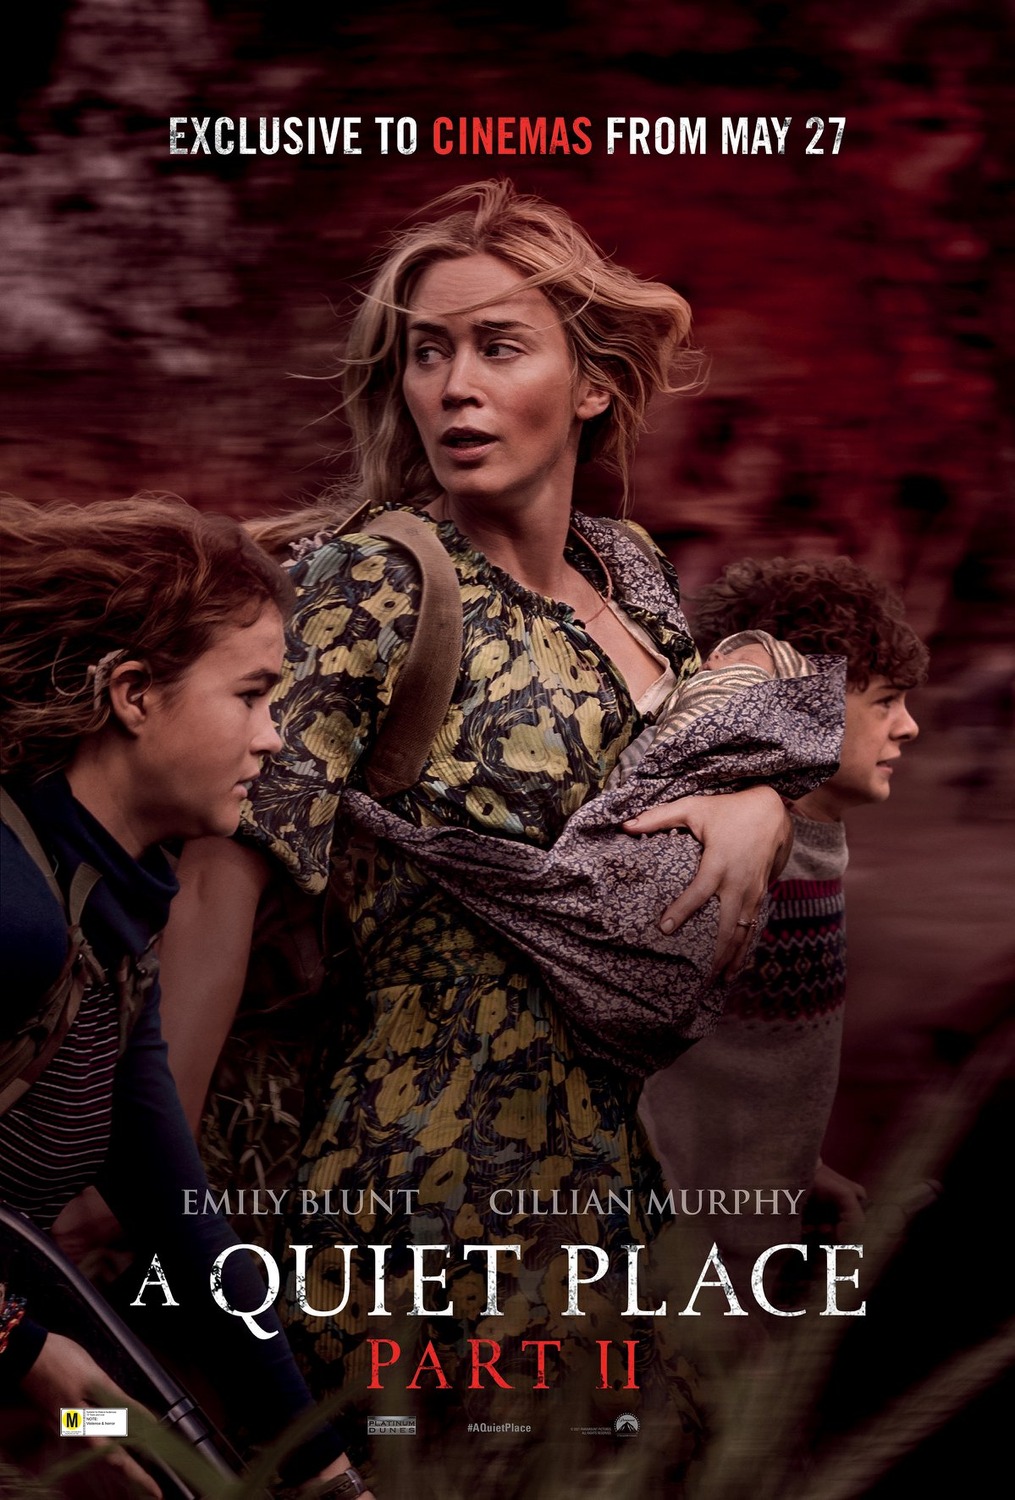 Singapore Box Office: A QUIET PLACE PART II spends second week at no. 1